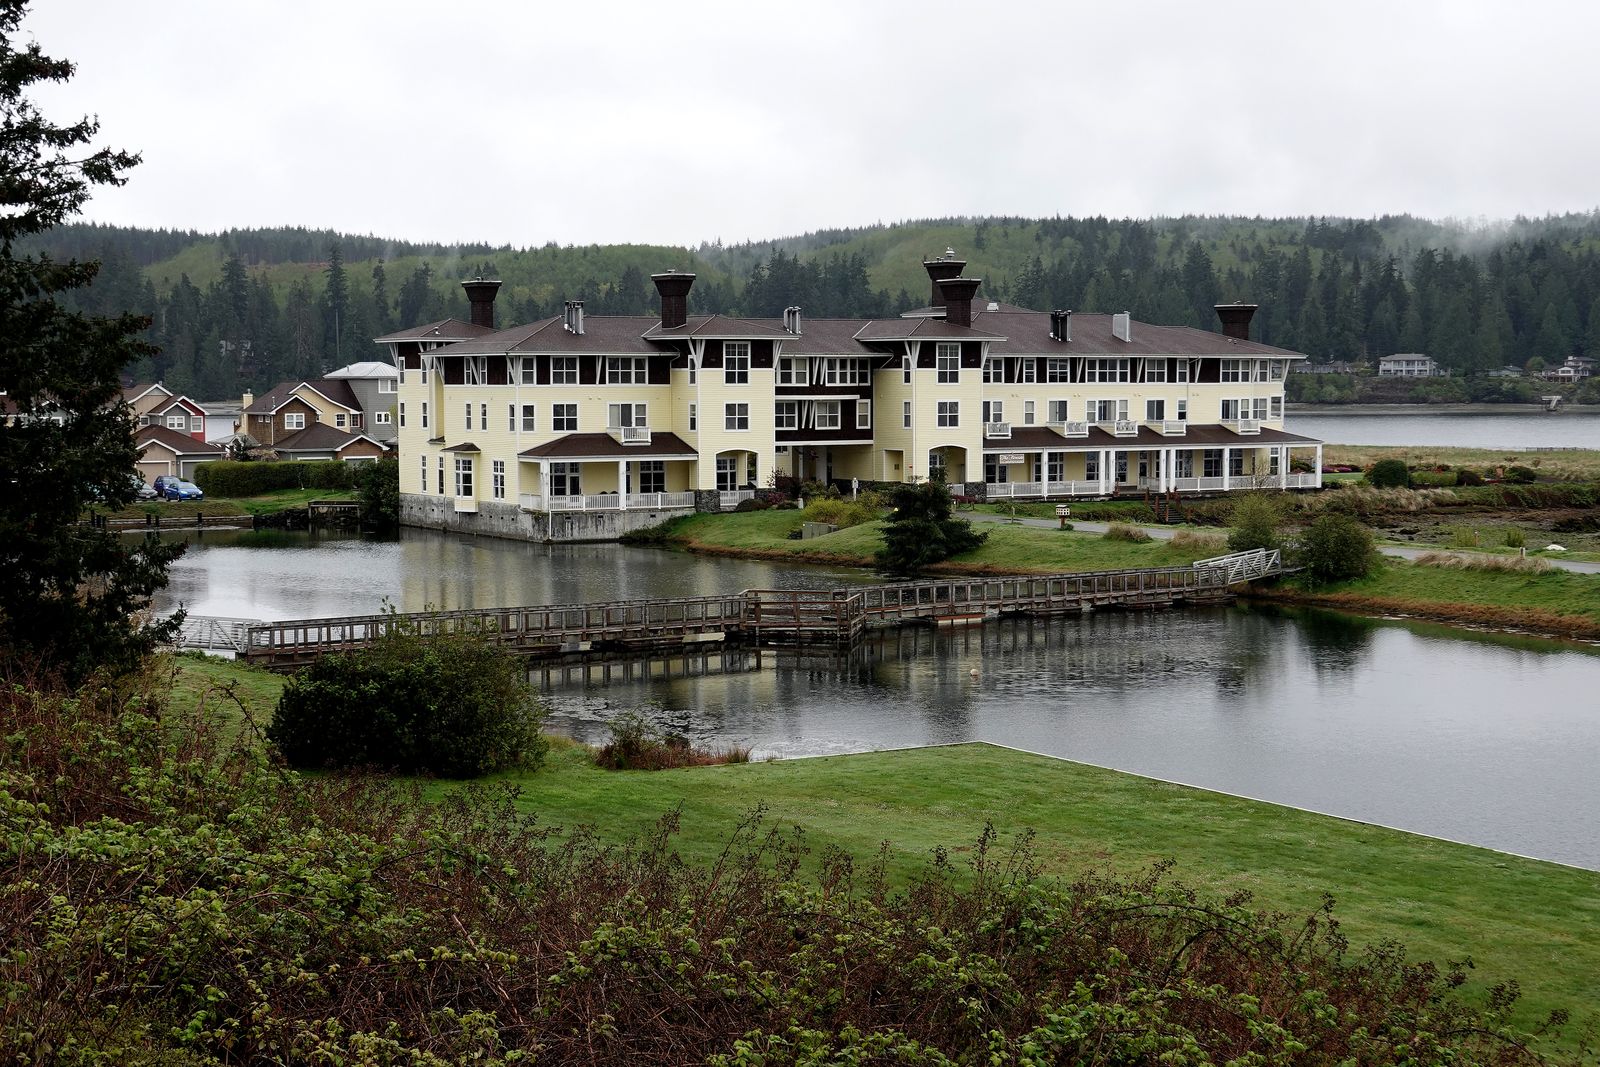  At the end of our hike is a nice view of the Port Ludlow Inn 